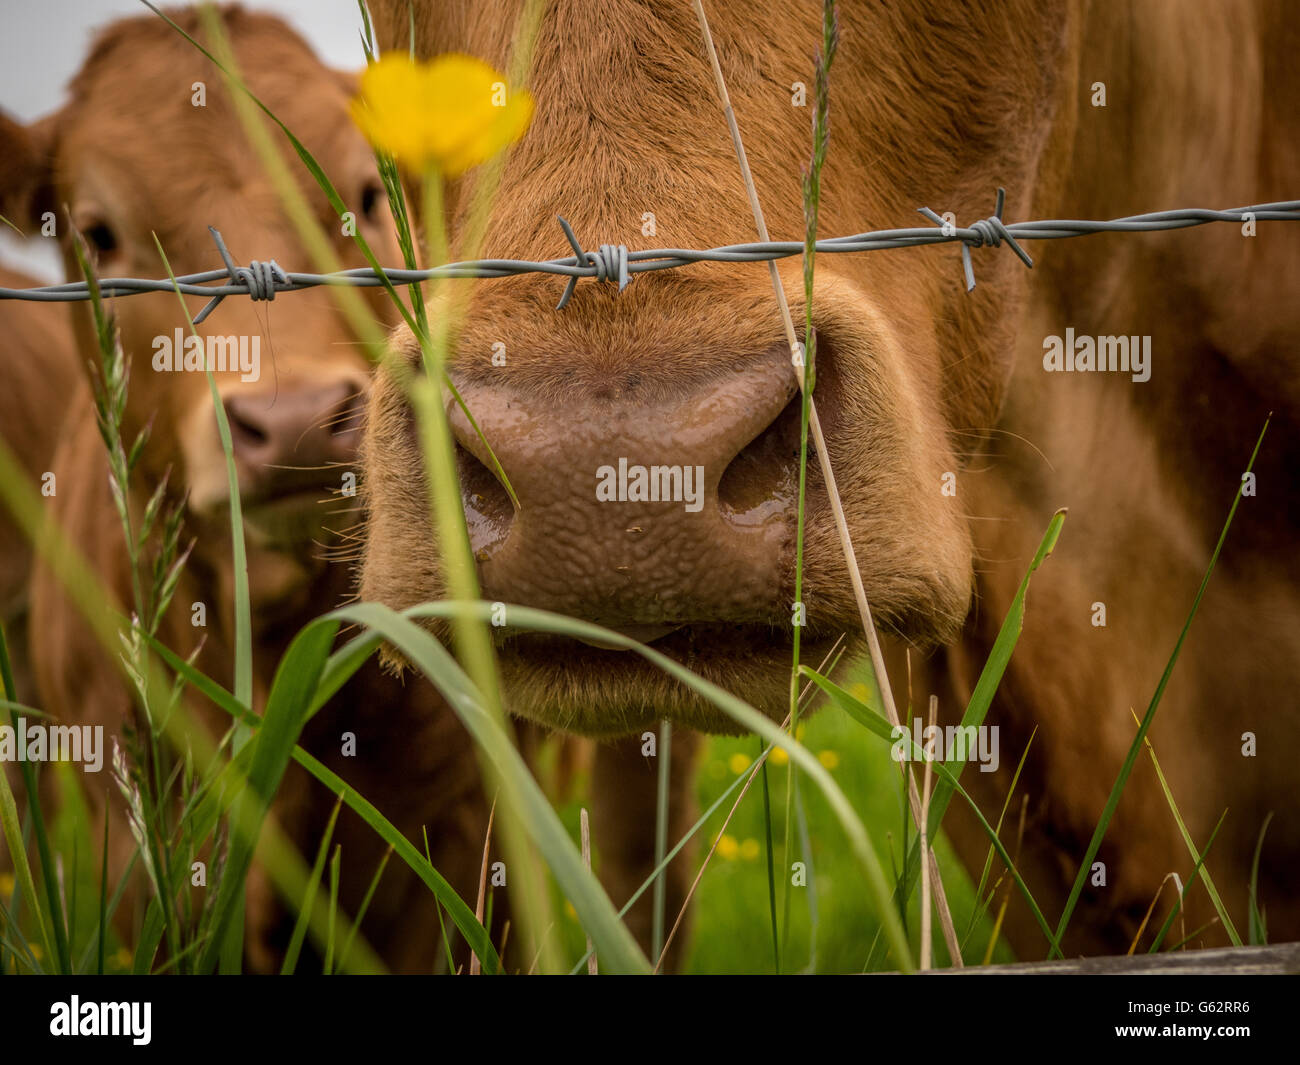 Cows nose behind barbed wire fence Stock Photo